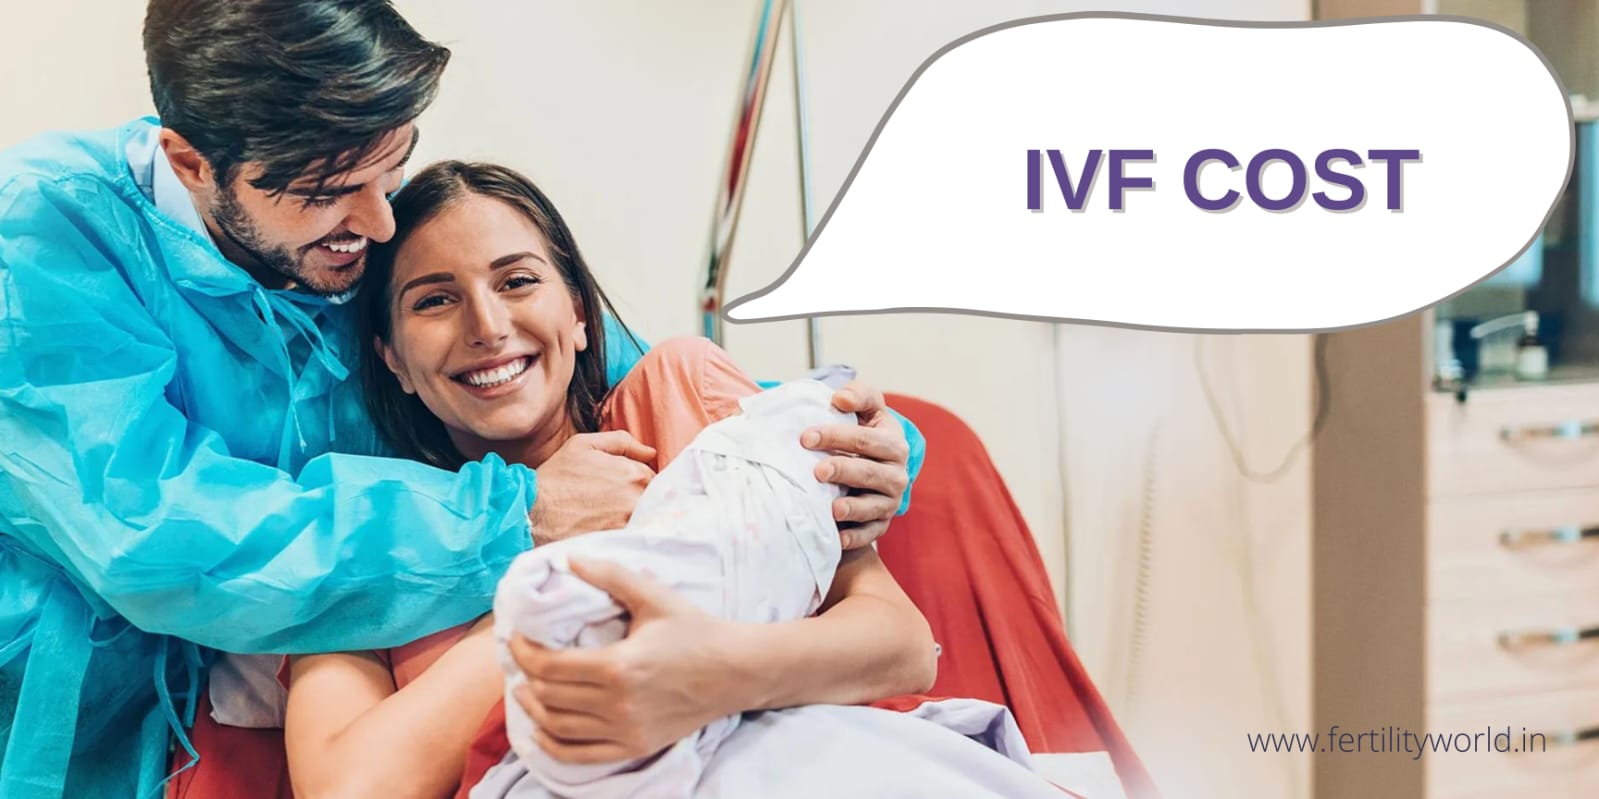 IVF cost in the USA